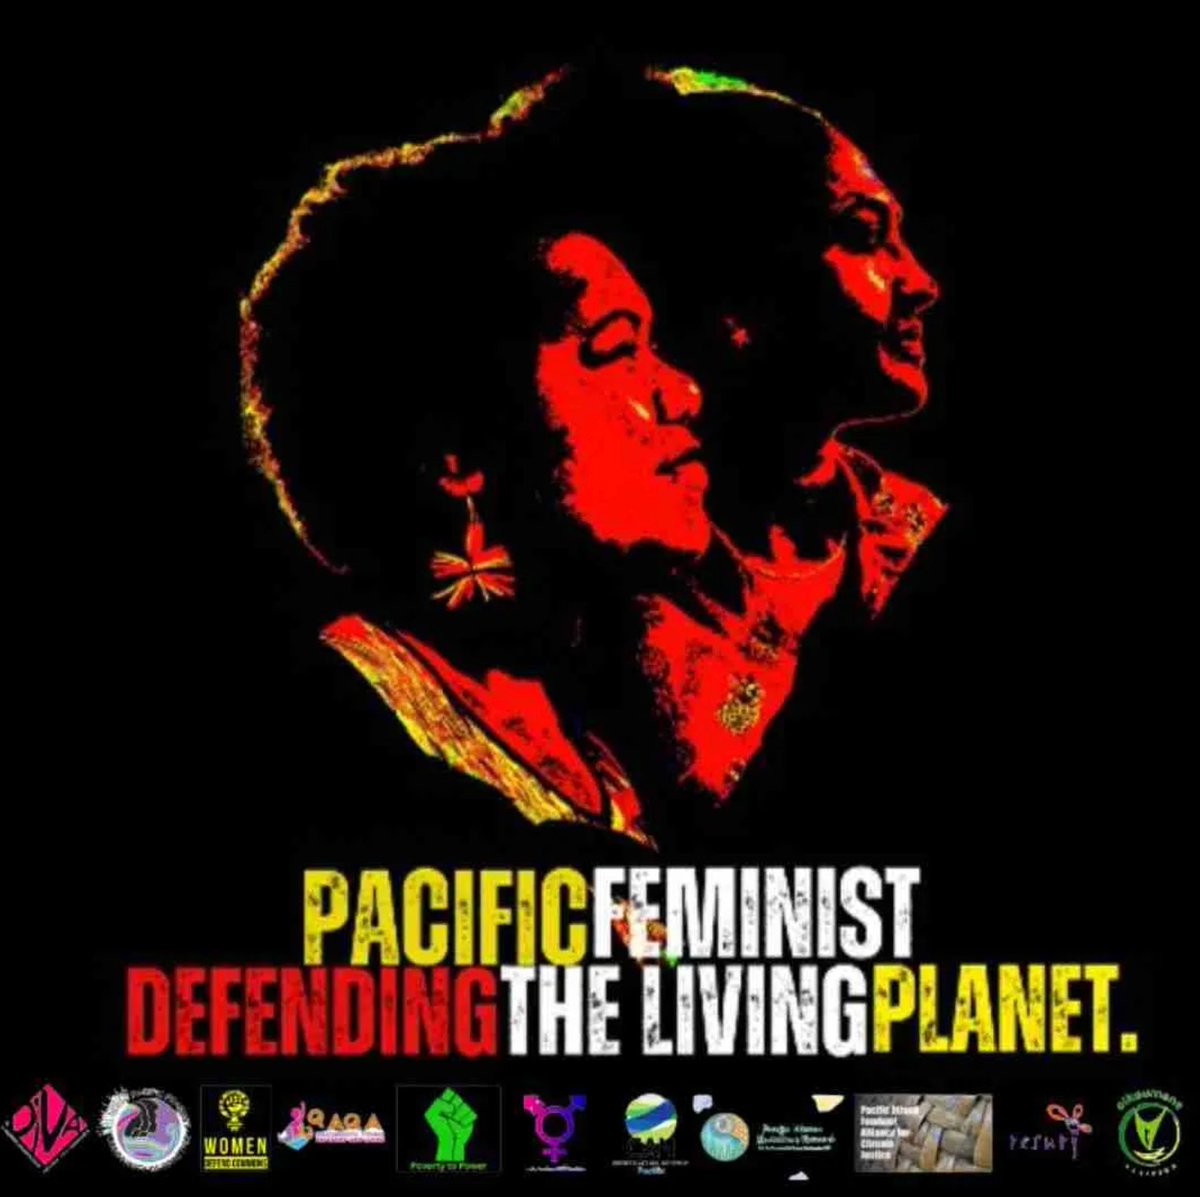 ENDORSE AND JOIN THE CAMPAIGN: FEMINISTS DEFENDING THE LIVING PLANET! (led by Pacific feminist groups): Individuals & organisations welcome from every region: docs.google.com/forms/d/e/1FAI… #GenderSocialEconomicEcologicalClimateJustice